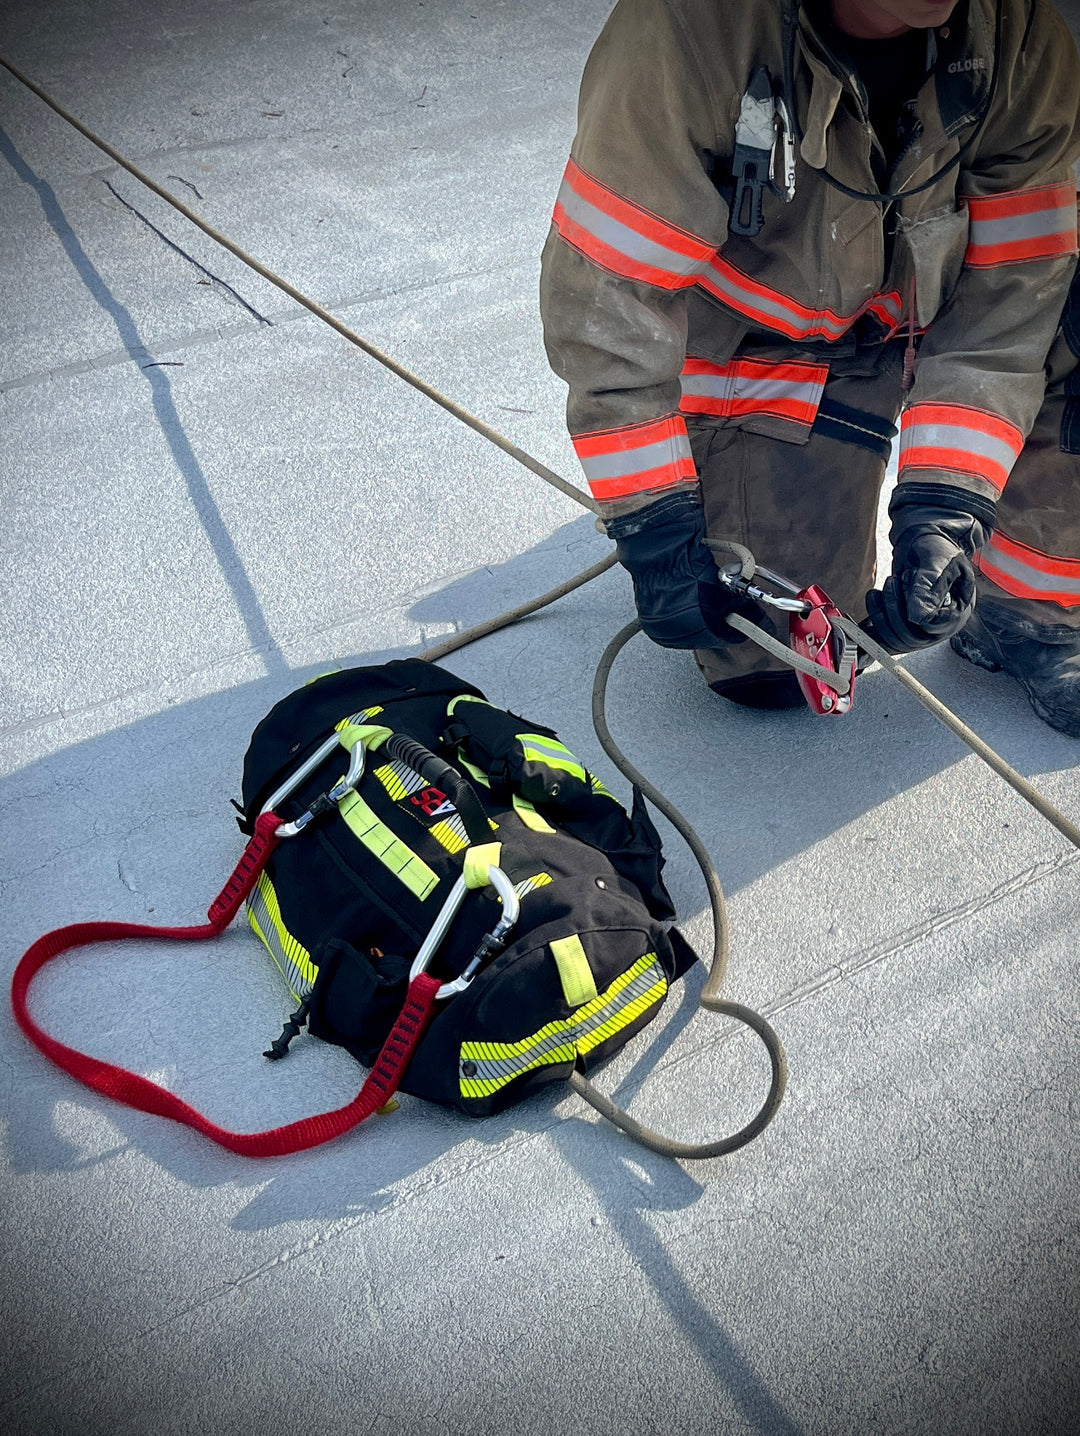 Fireground Special Operations Rope Bag